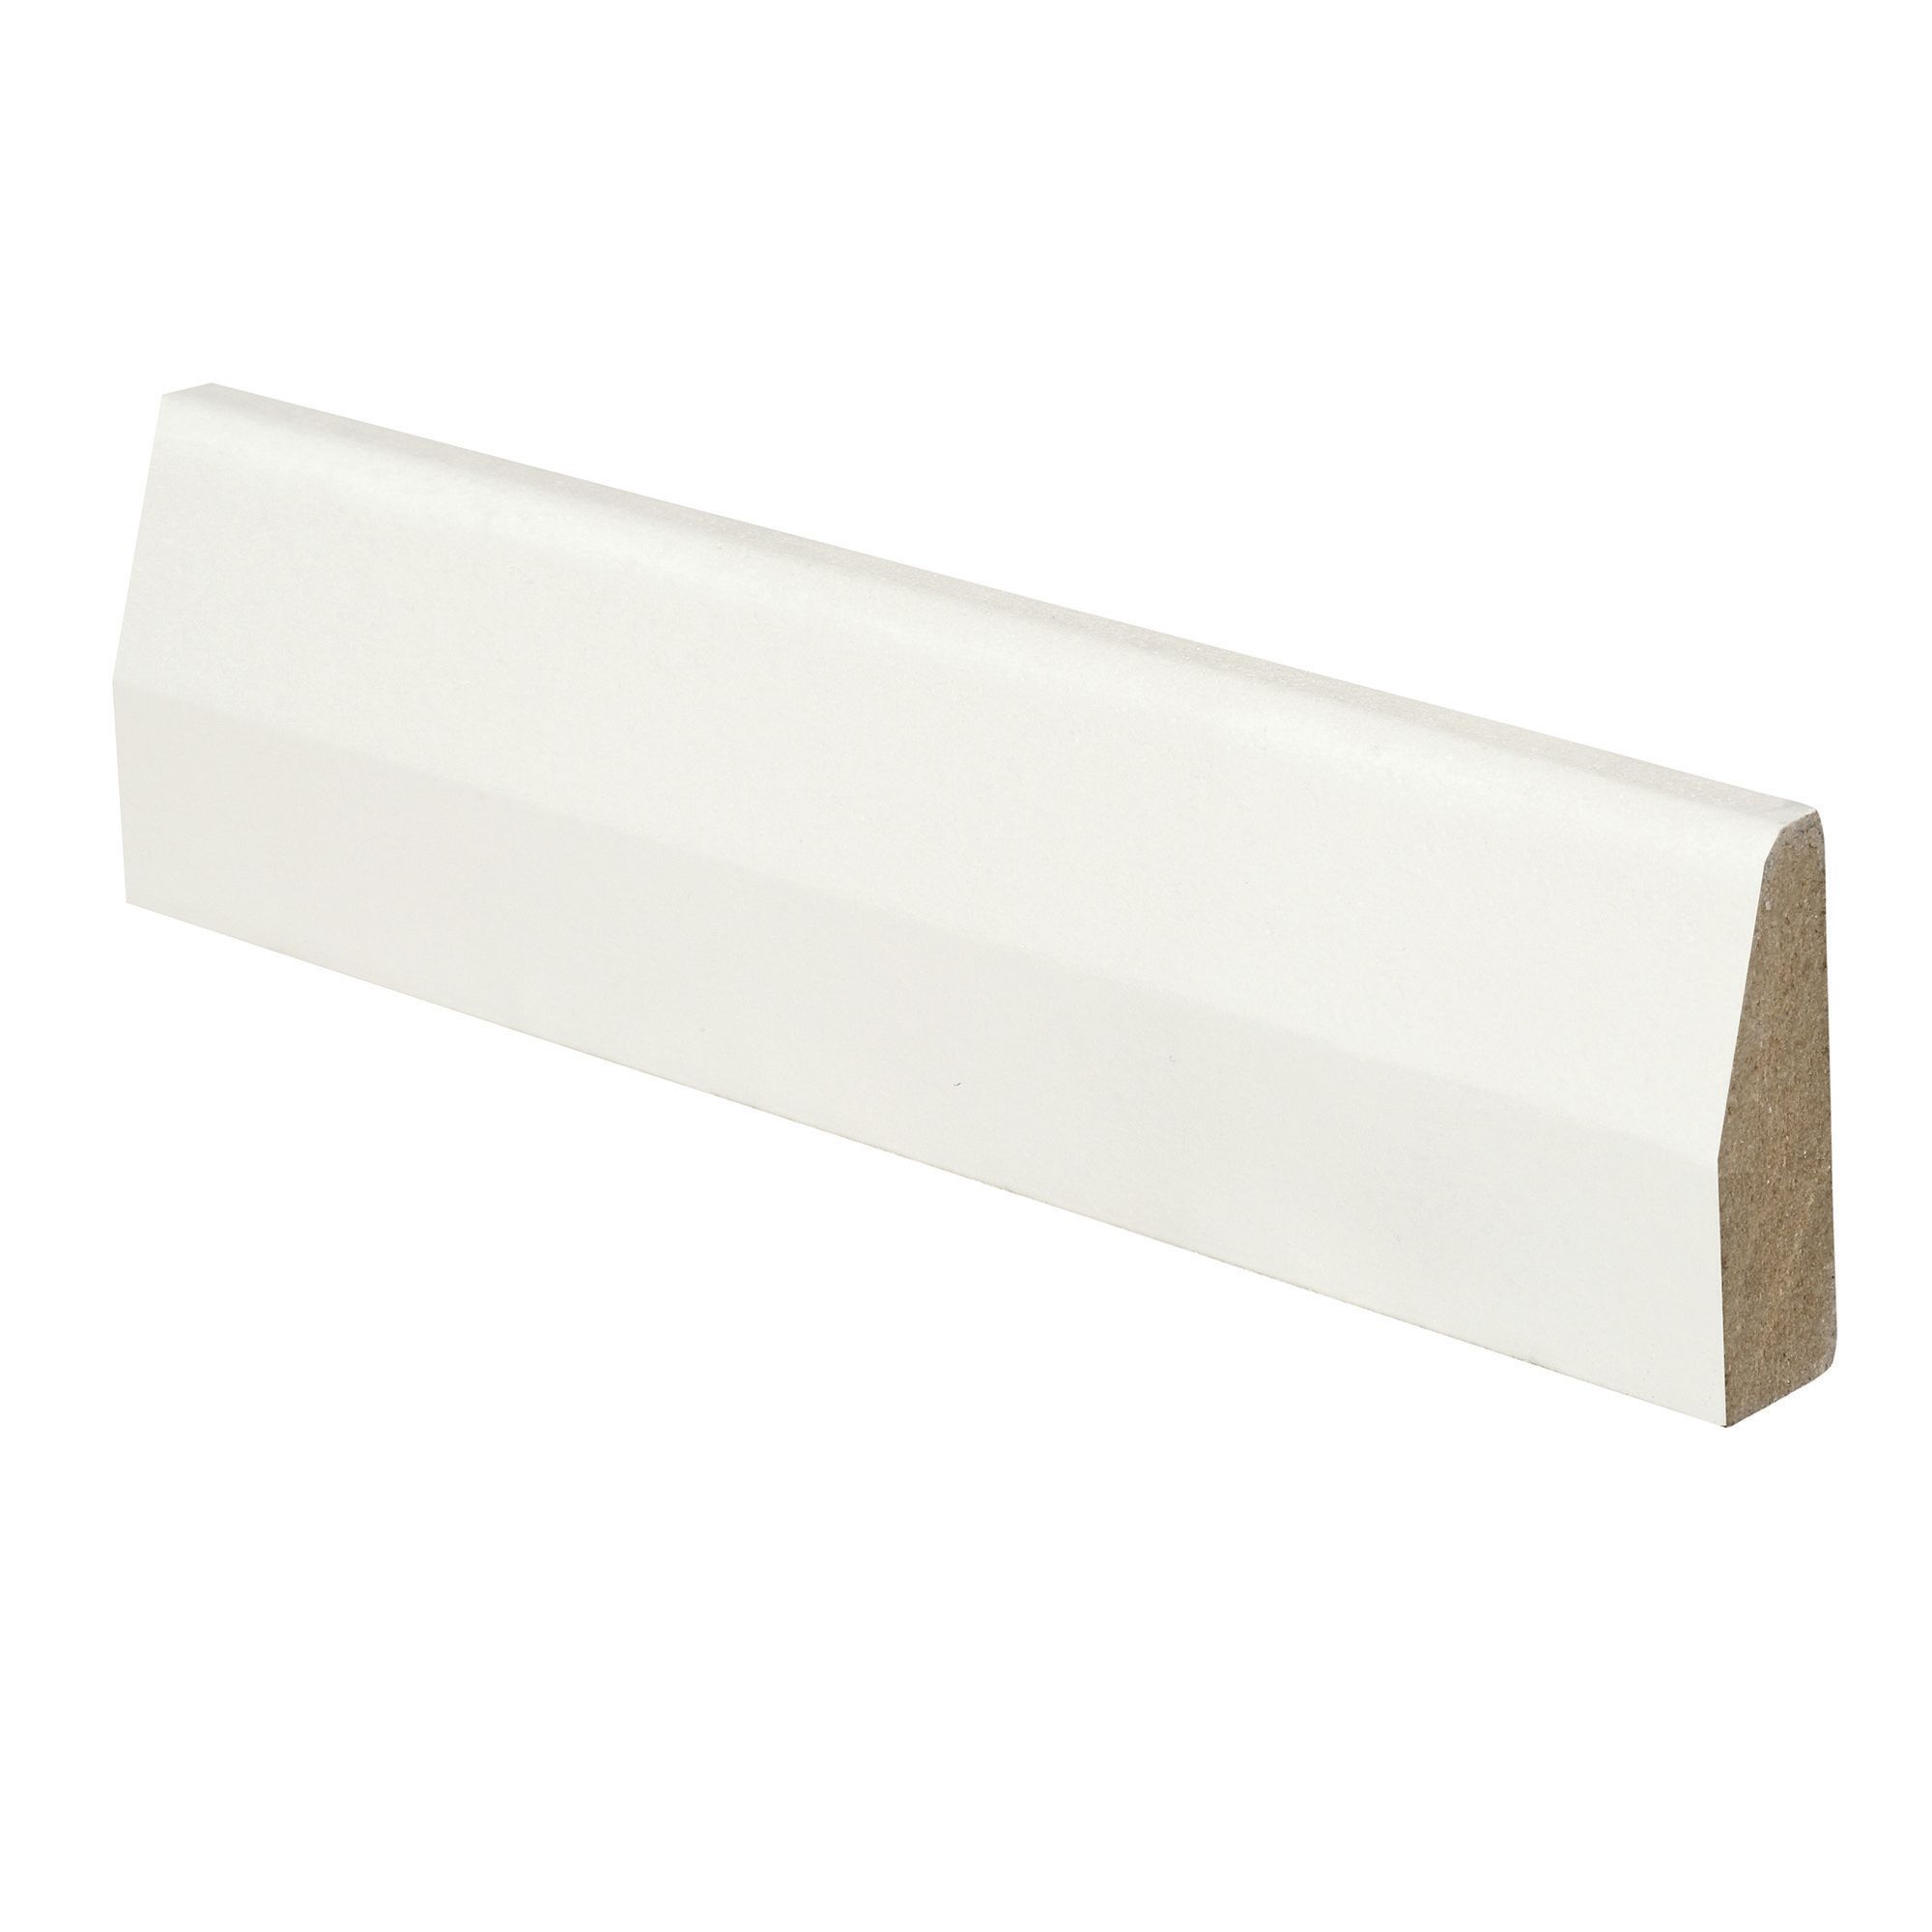 Image of Wickes Chamfered Fully Finished MDF Architrave - 14.5mm x 44mm x 2.1m